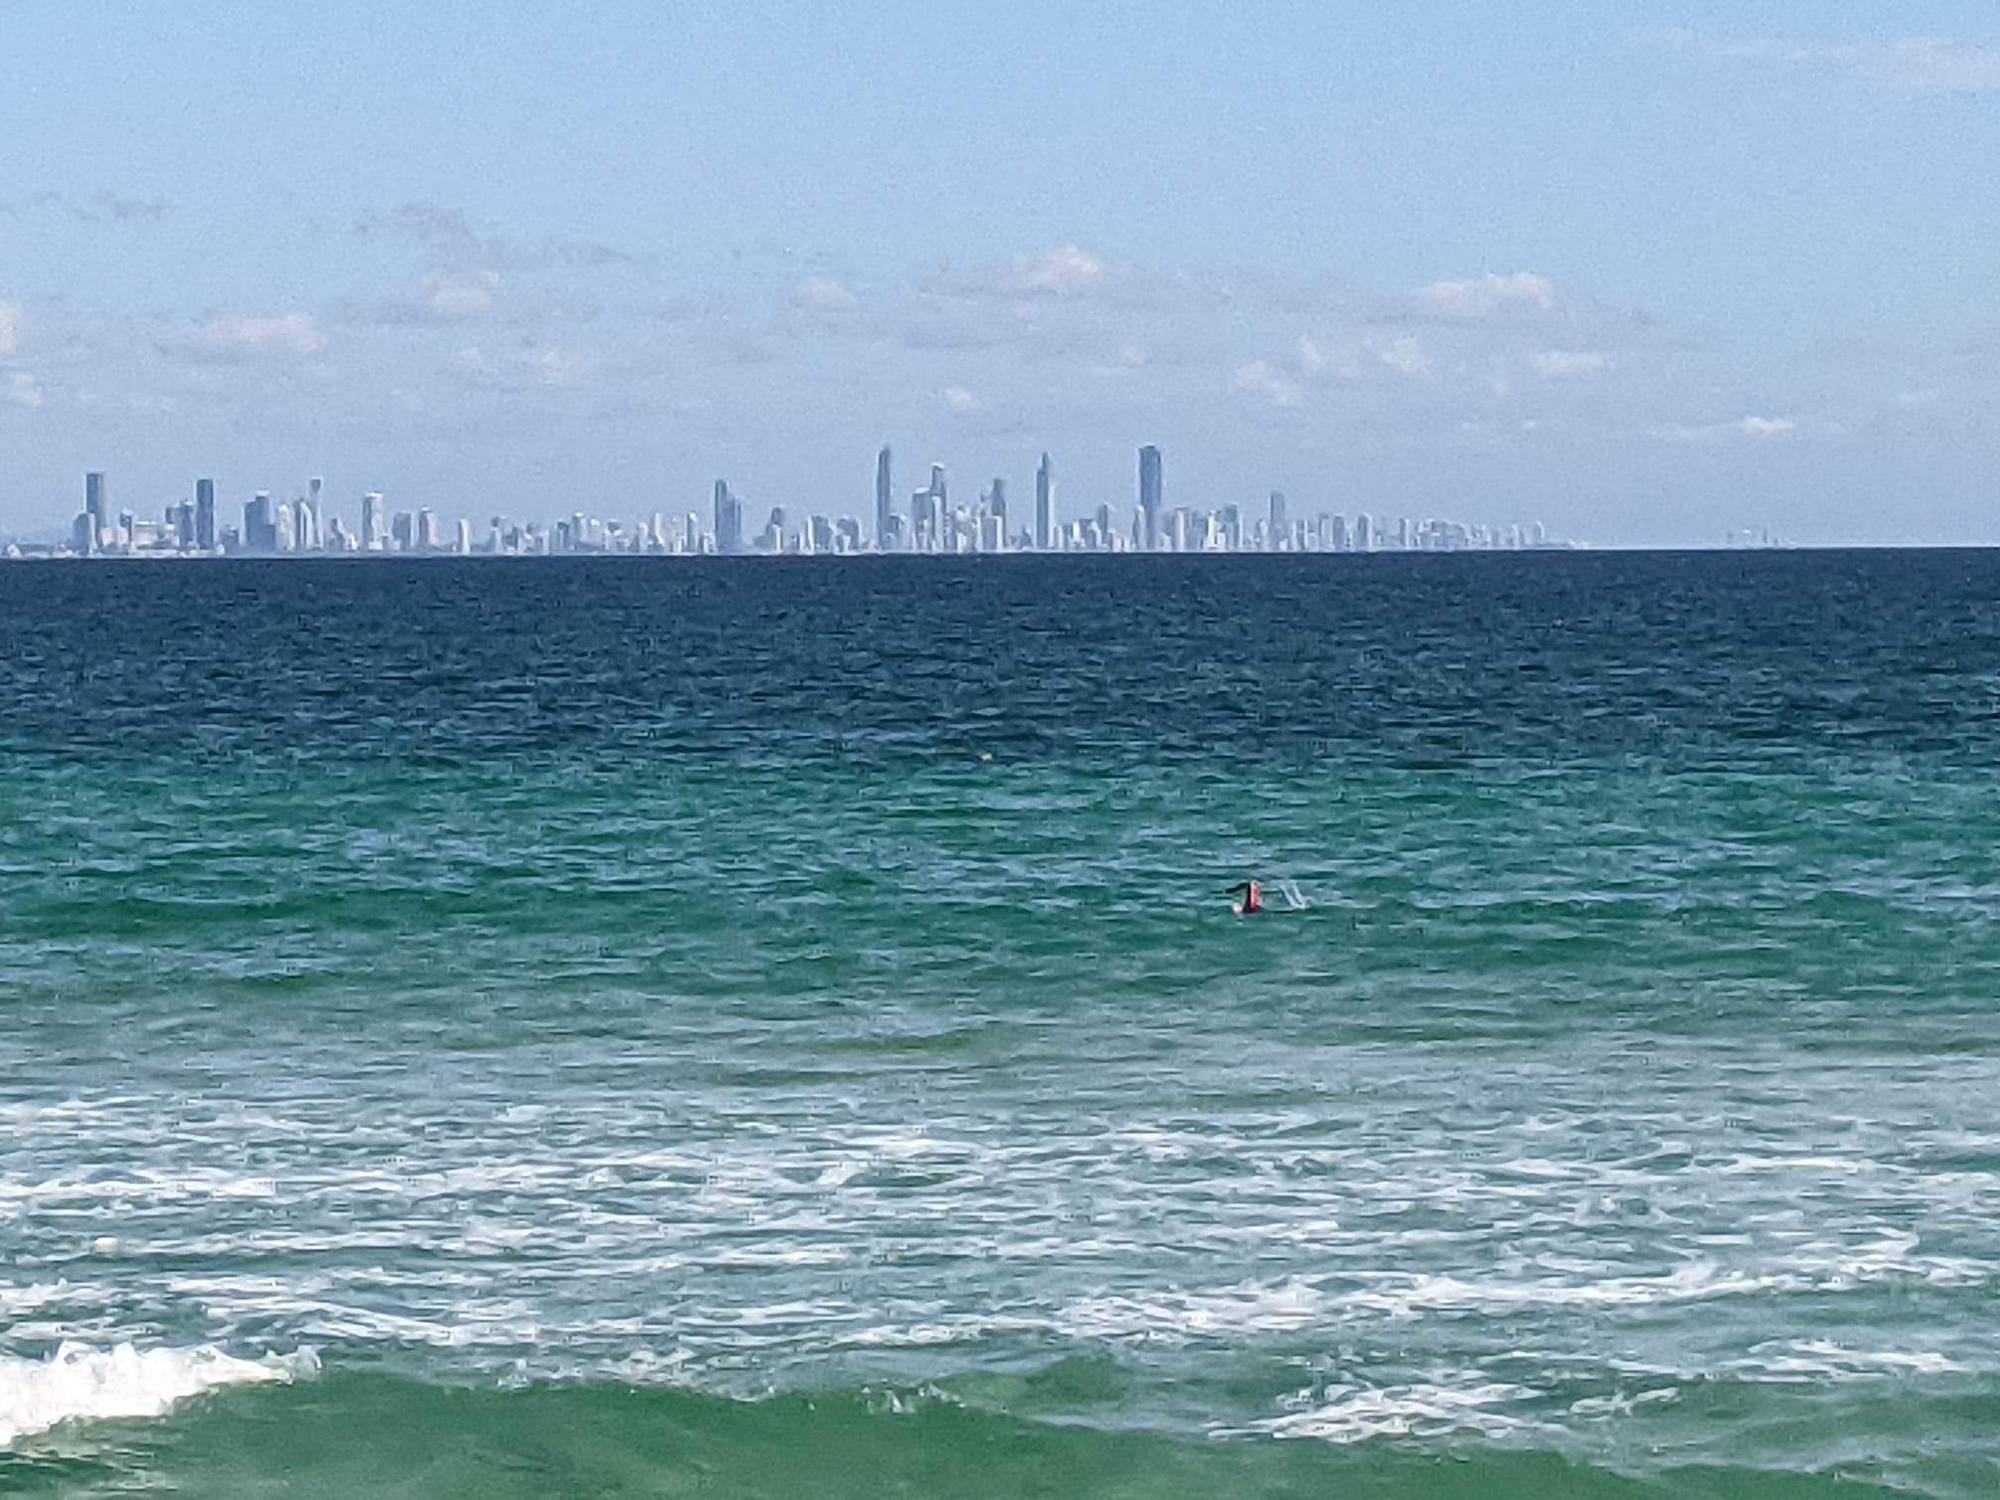 After our walk, I did a swim from Rainbow Bay to the start of Coolangatta Beach @consciouscat was able to get a great action photo with the iconic Surfers paradise skyline.